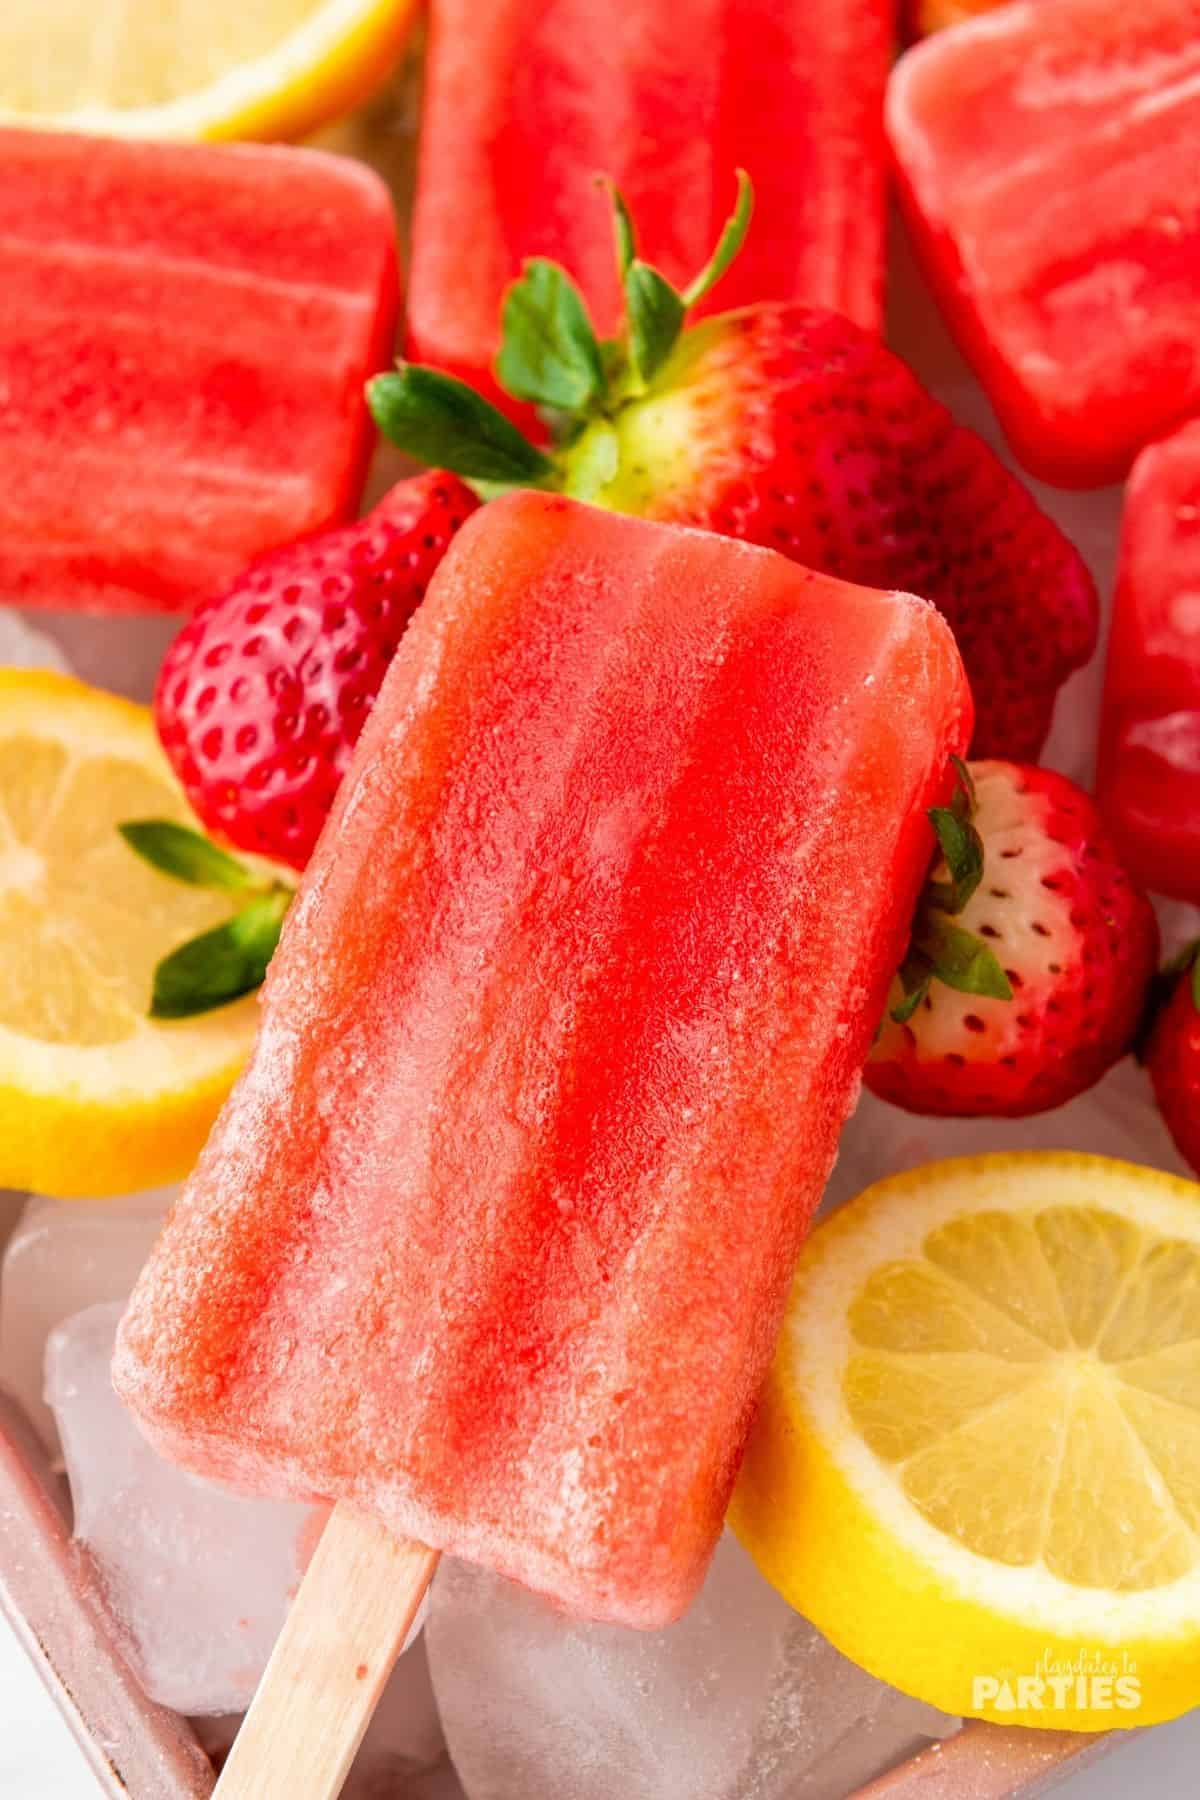 Ice cold strawberry lemonade popsicles are brightly colored and citrusy.